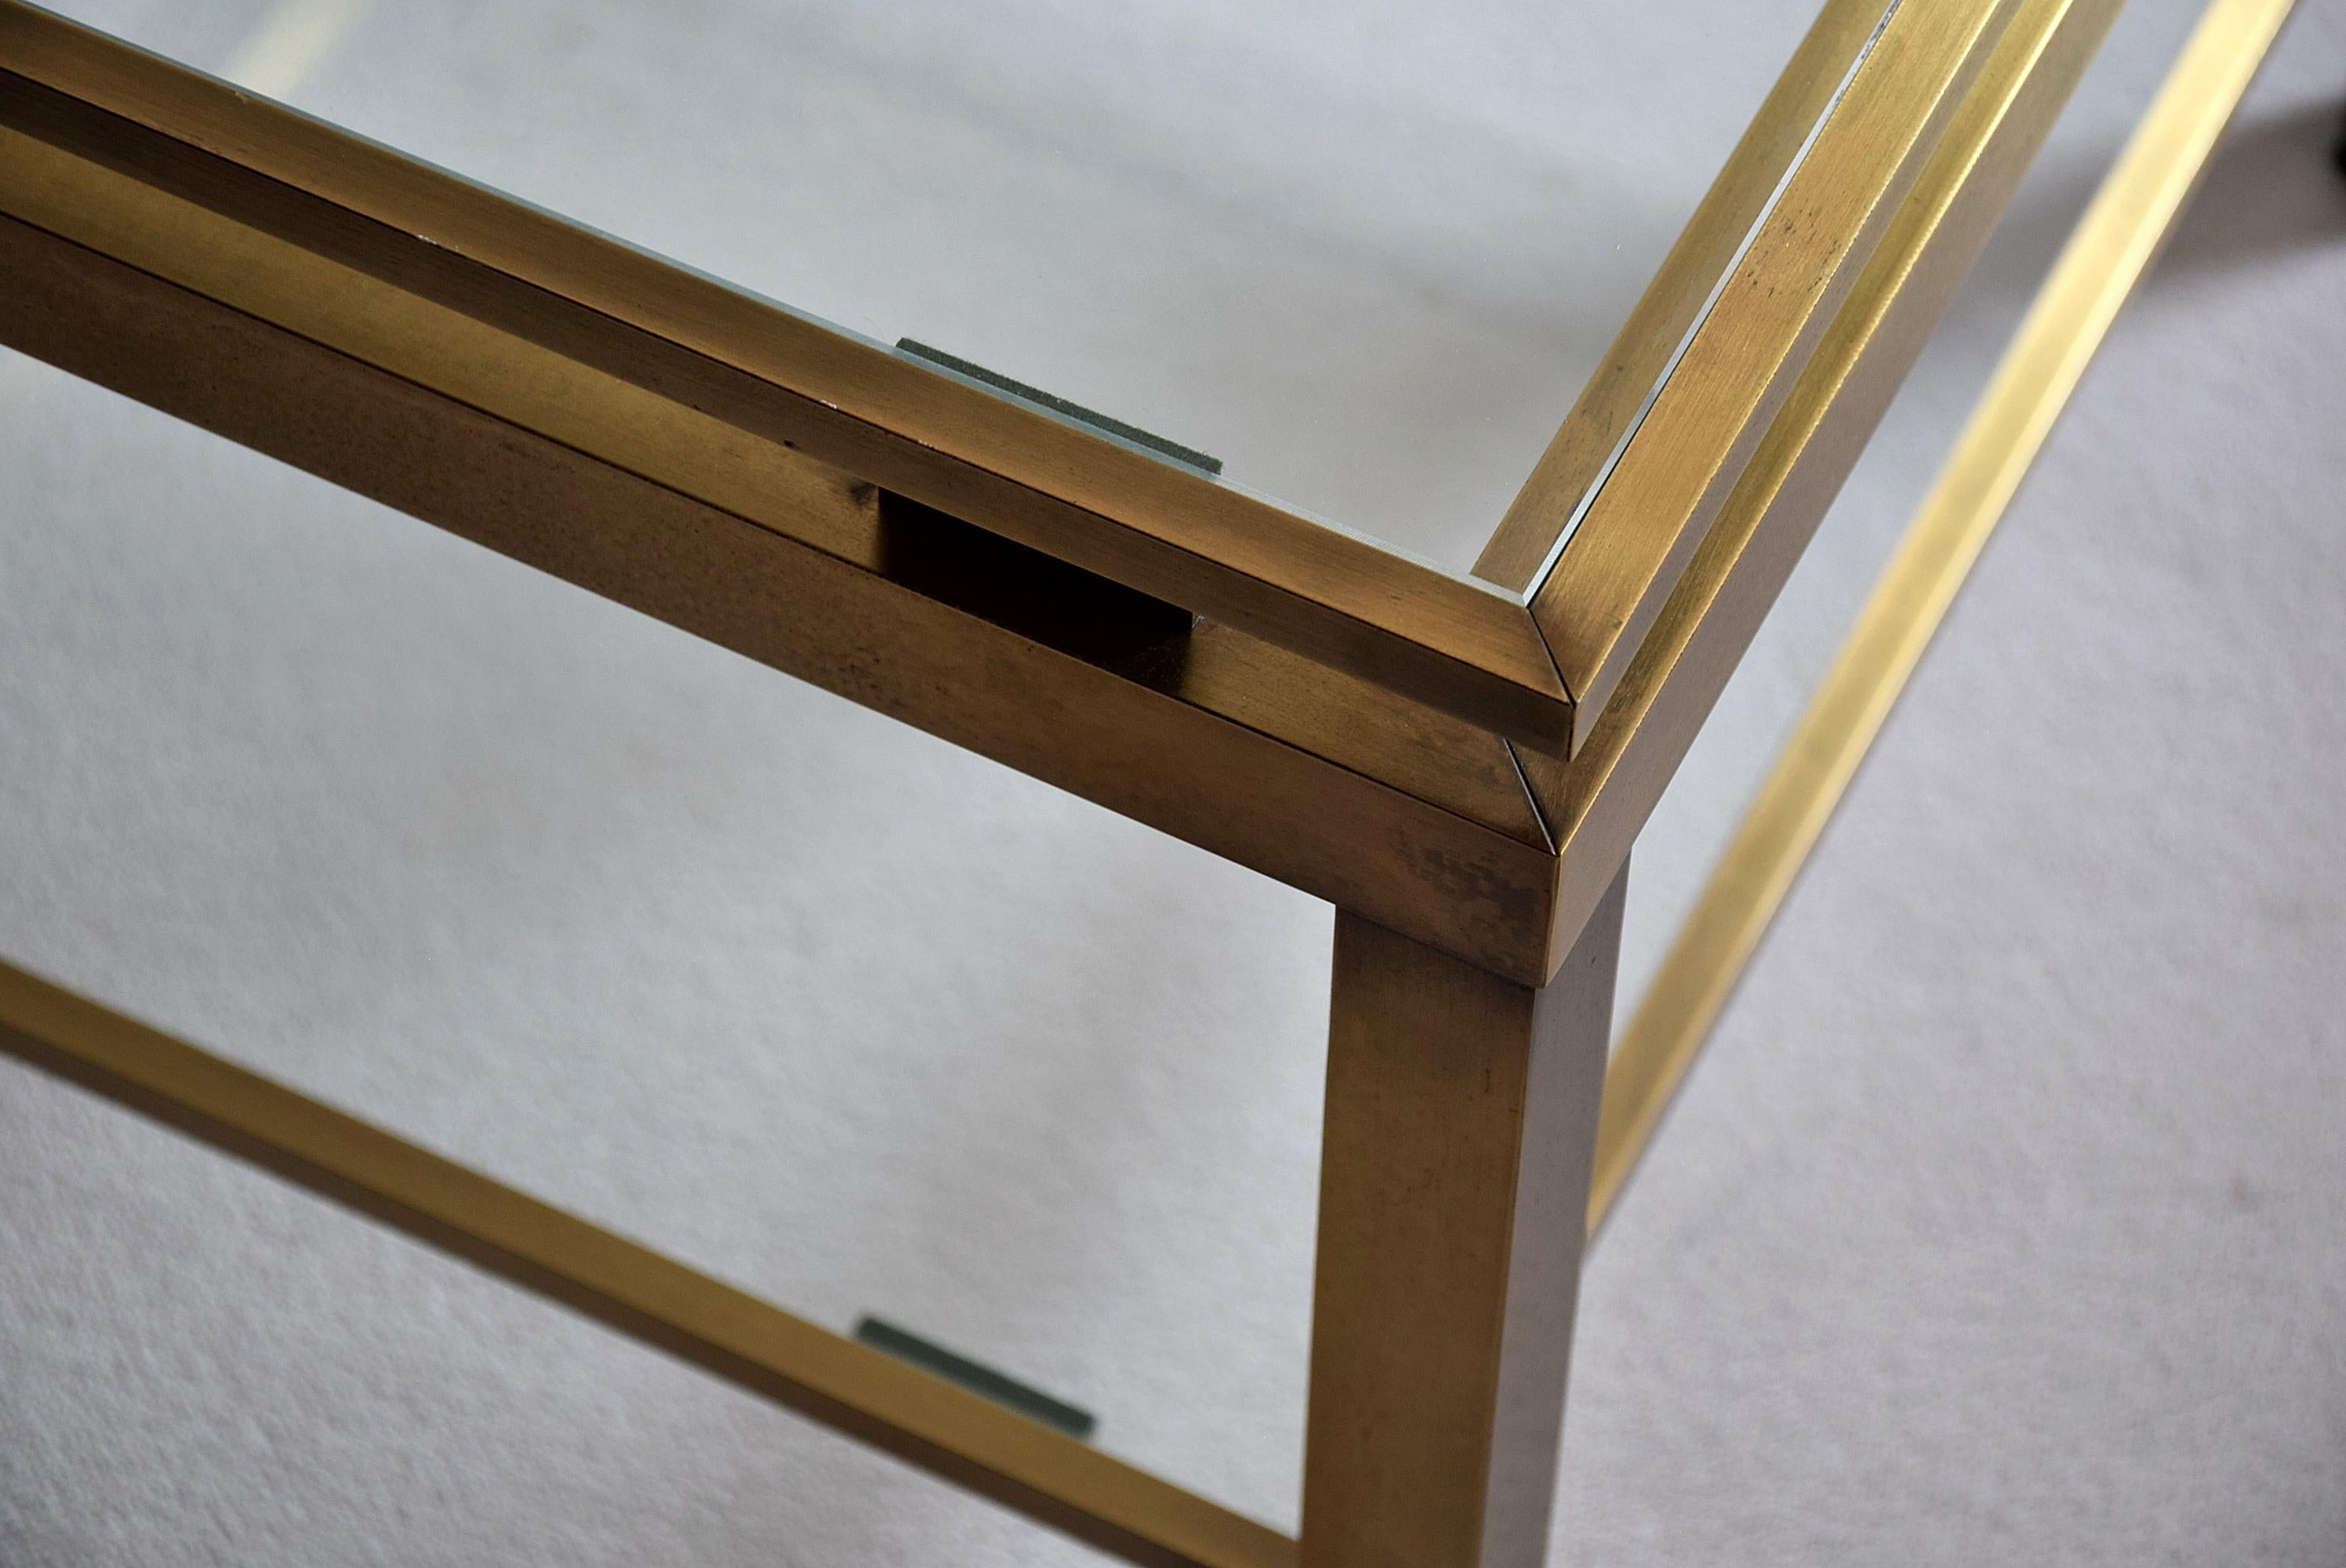 Brass side table by Maison Jansen. Stylish Mid-Century Modern two-tier coffee table by Maison Jansen.
This sophisticated piece is in excellent condition.

Measurements: D 60.5 x W 60.5 x H 46 cm.
The table will be shipped overseas in a custom made